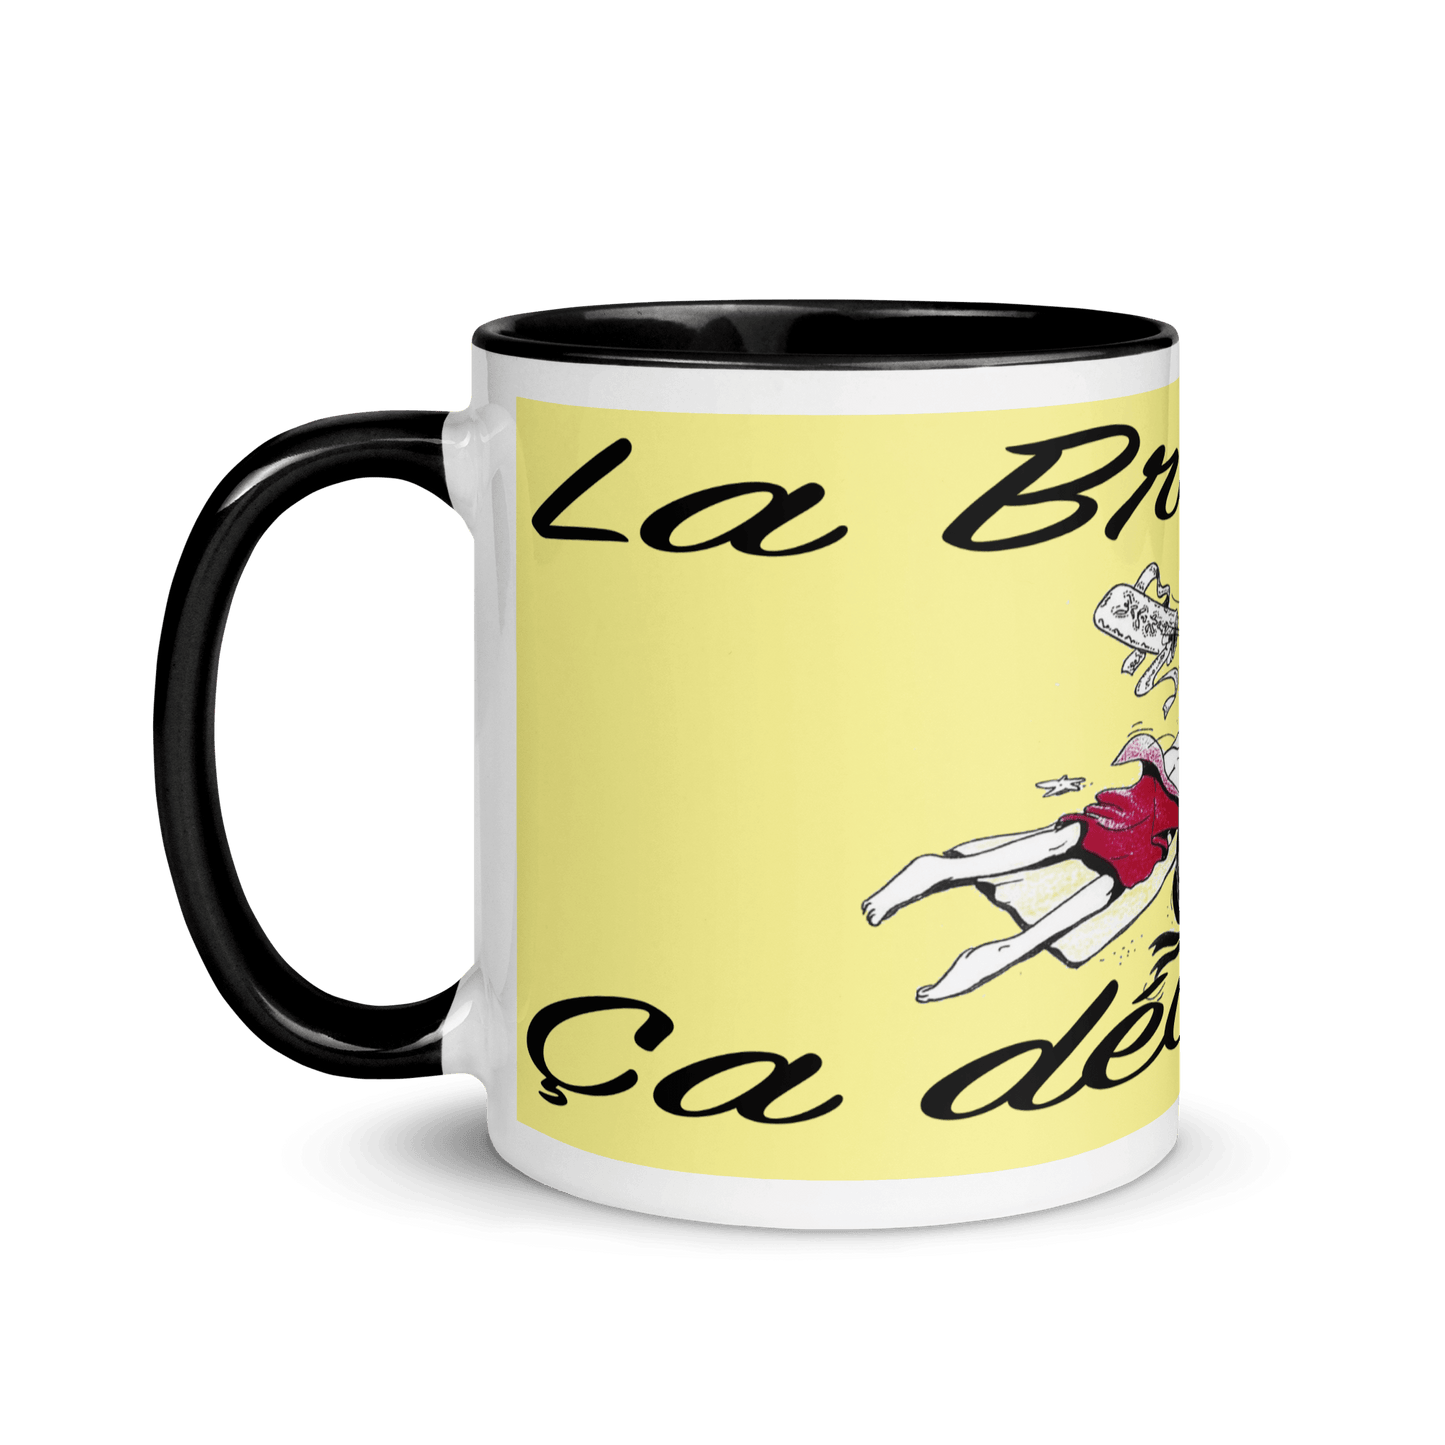 Mug with Colorful Interior Brittany is amazing